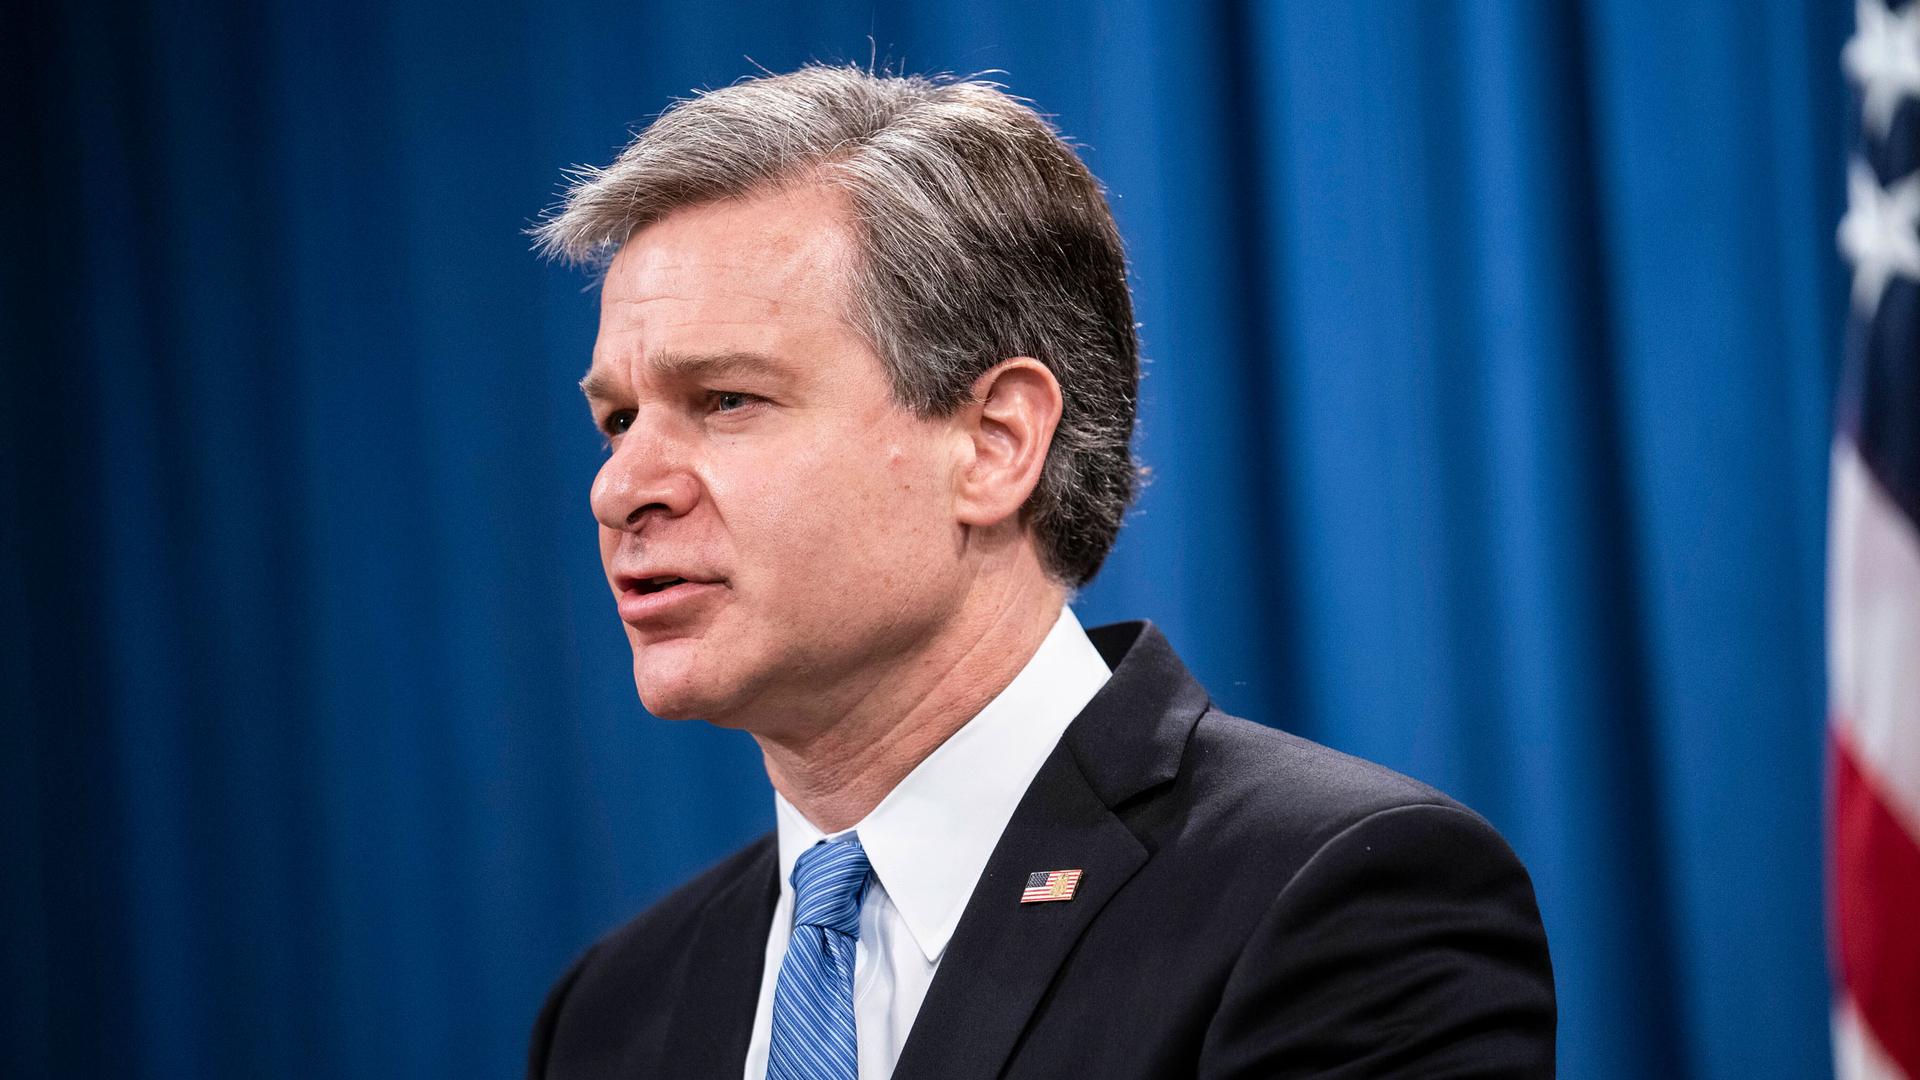 FBI Director Christopher Wray is shown wearing a dark suit and blue striped tie with a US flag pin on his lapel.